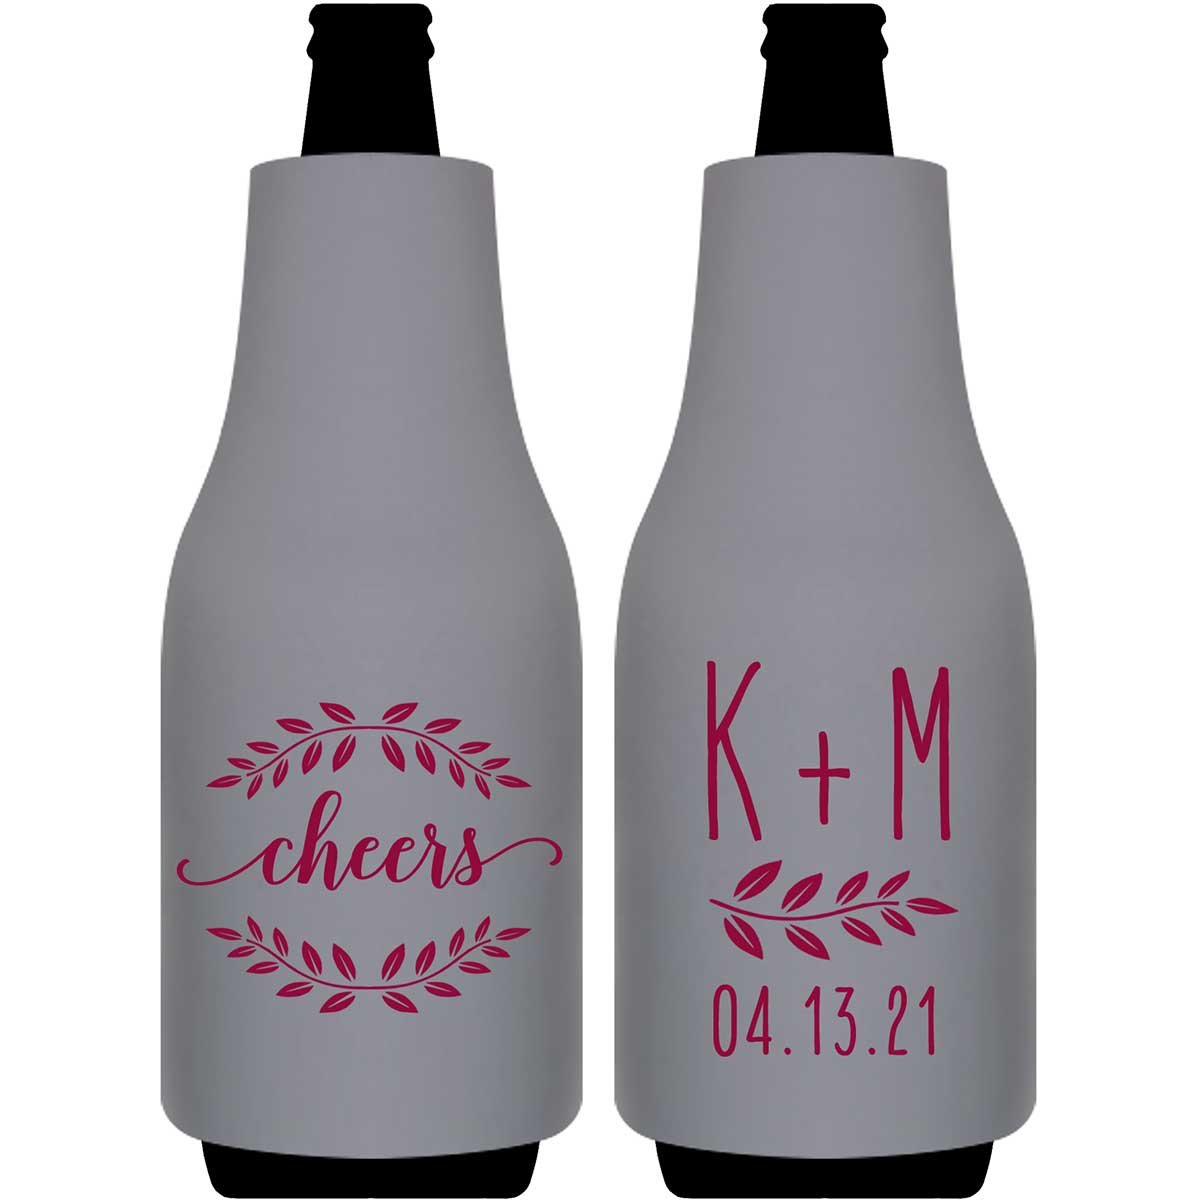 Cheers 4A Wedding Wreath Foldable Bottle Sleeve Koozies Wedding Gifts for Guests